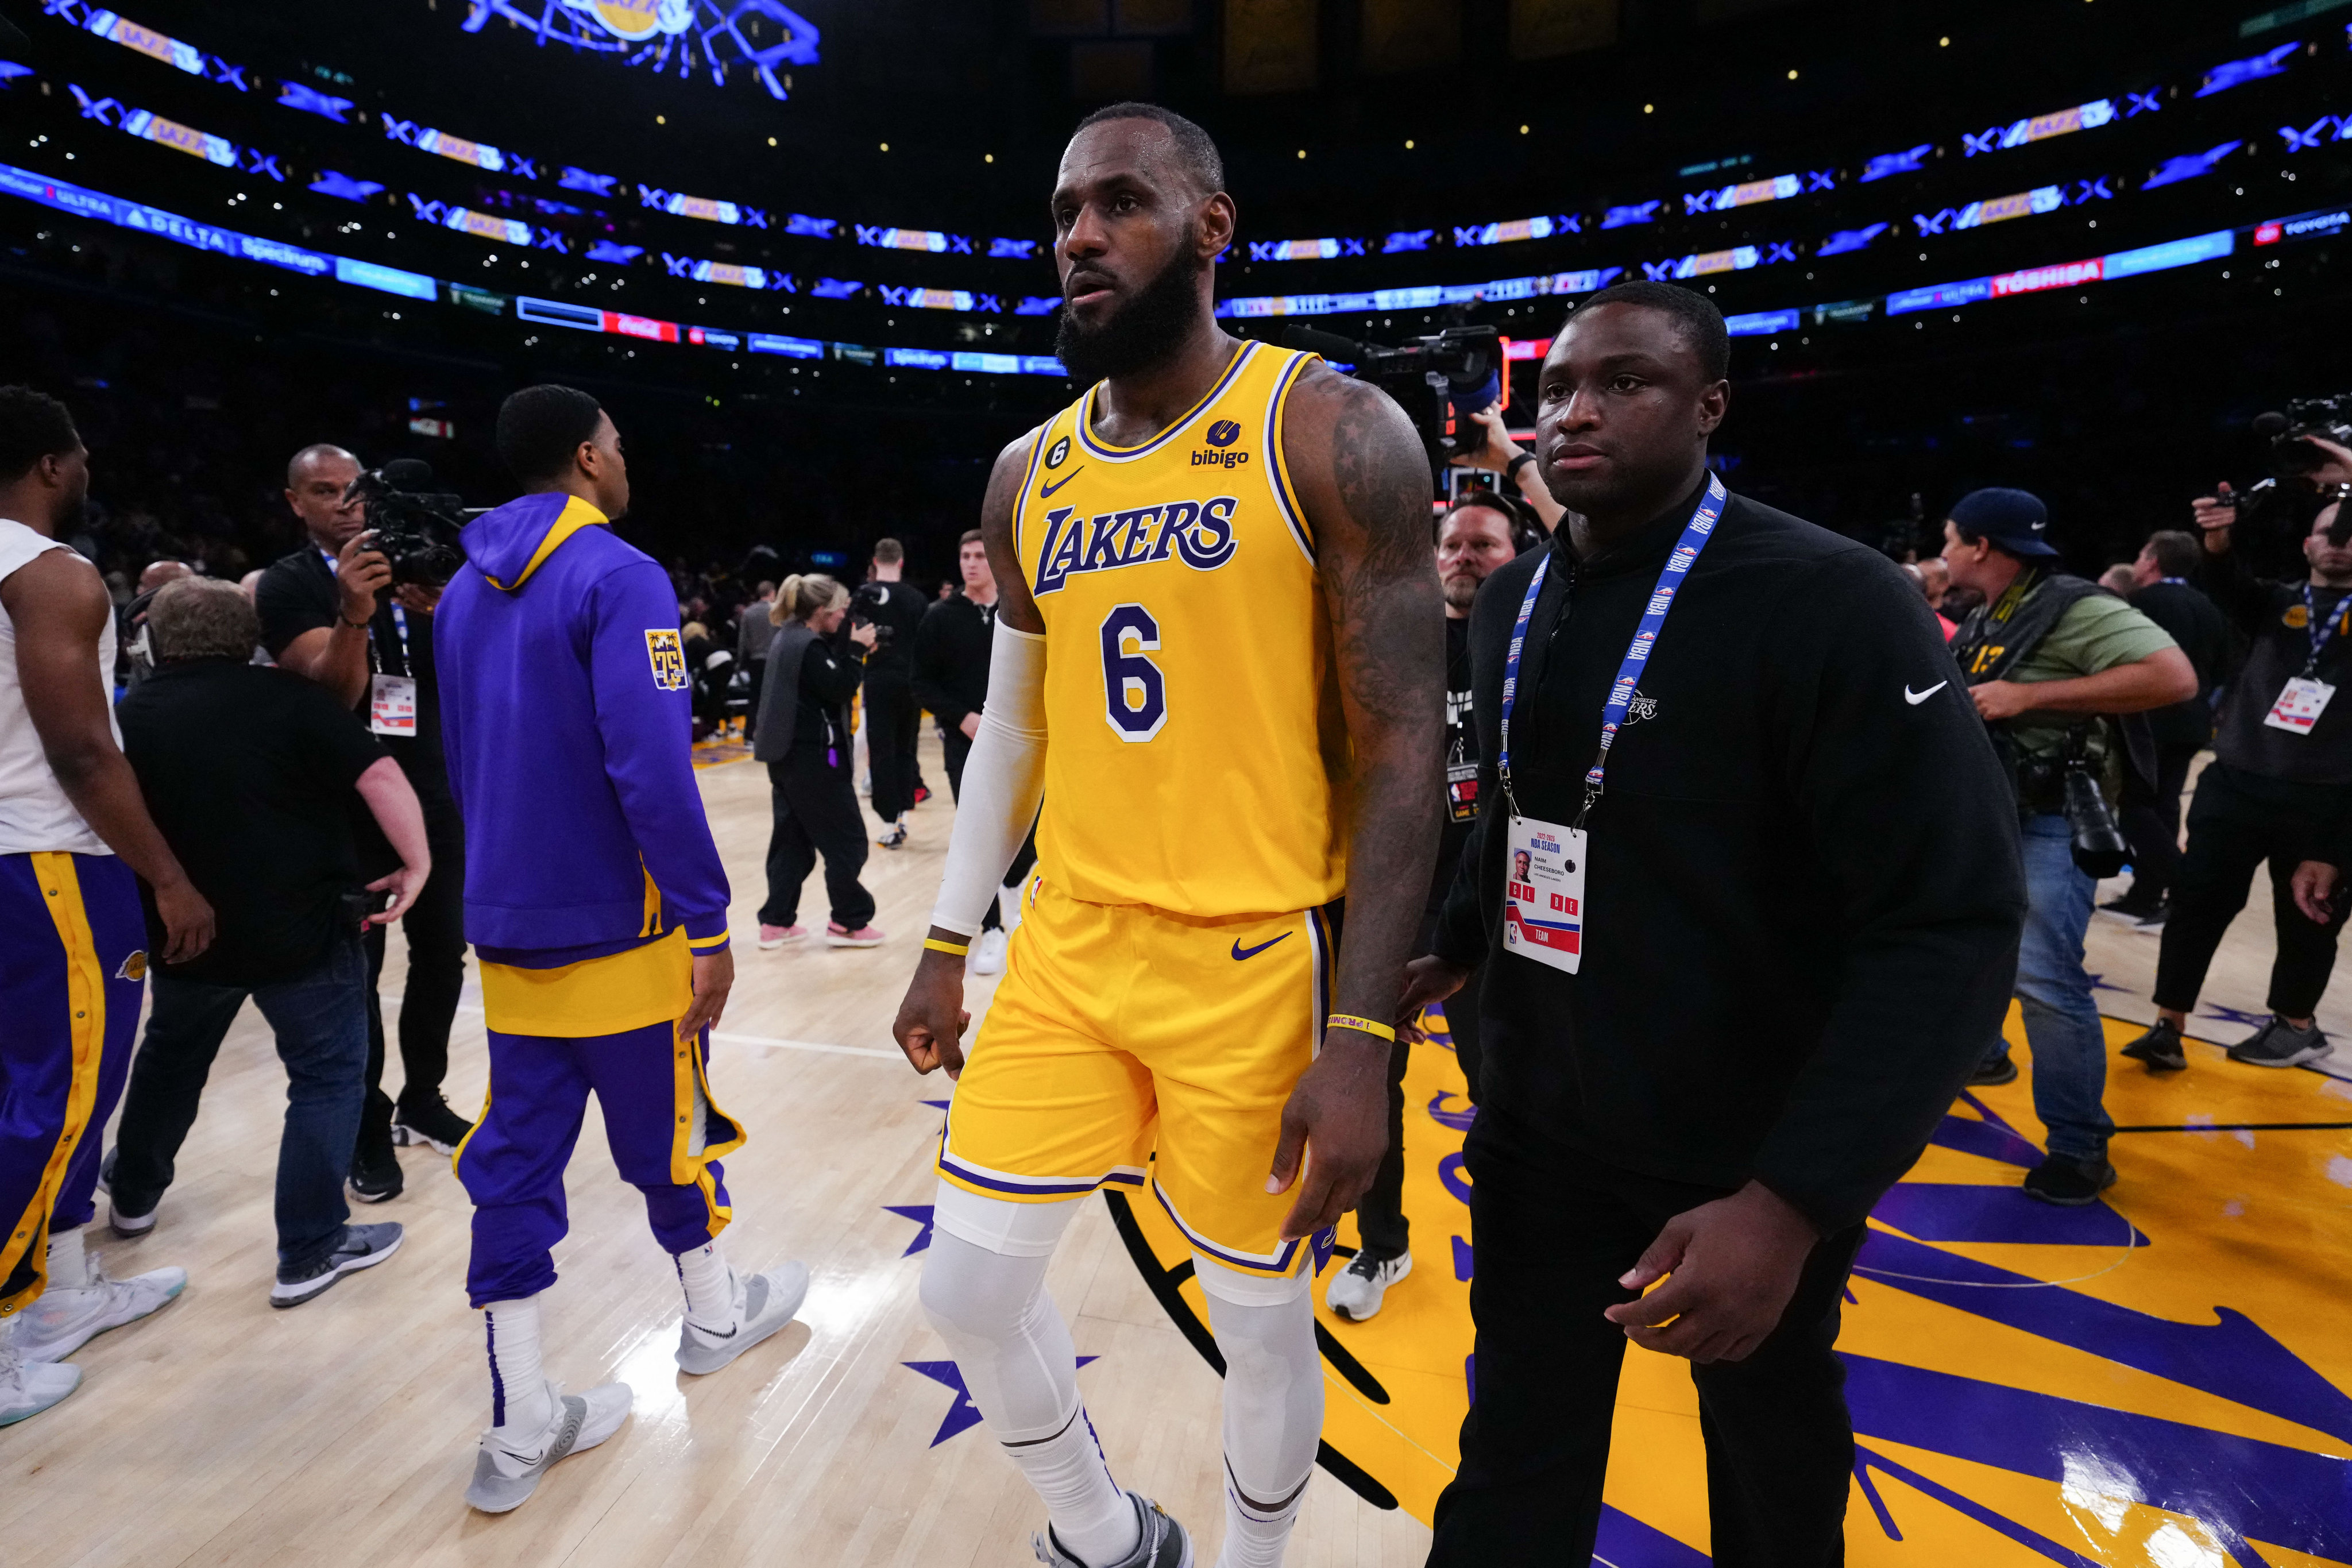 LA Lakers forward LeBron James’ NBA playoff hopes end with defeat by the Denver Nuggets. Photo: USA TODAY Sports via Reuters Con